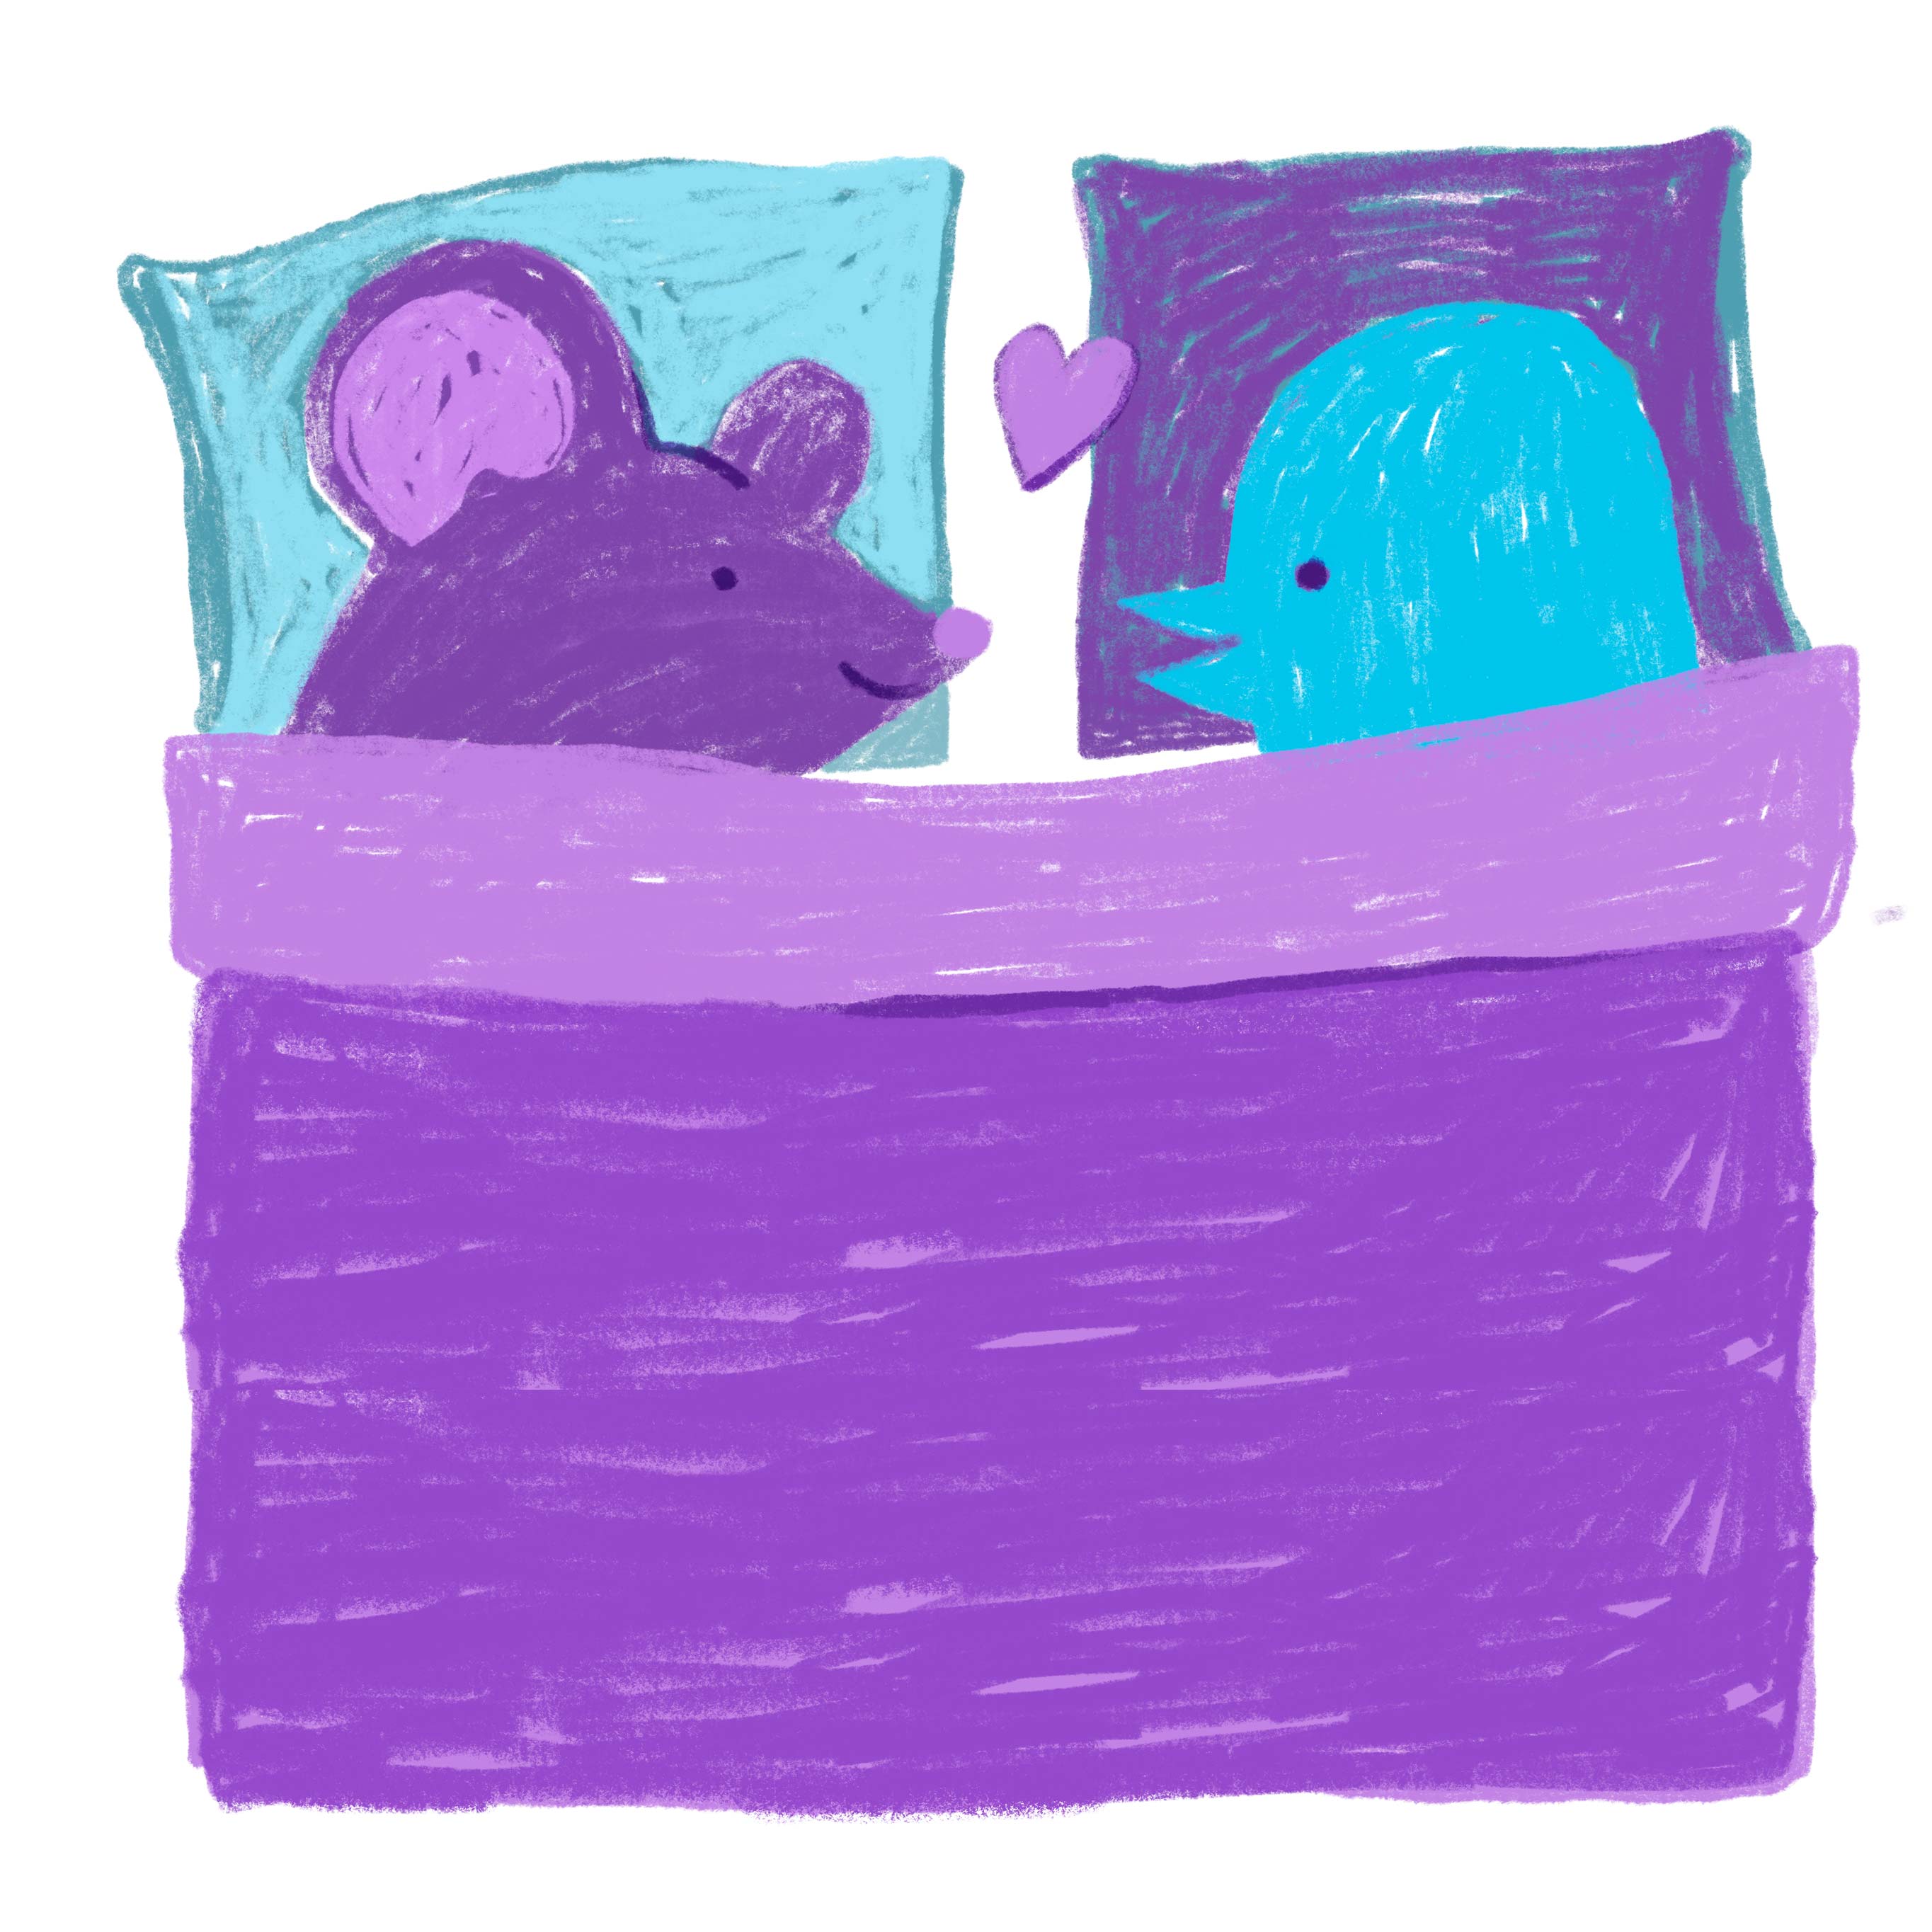 A purple rat in bed with the Twitter bird.